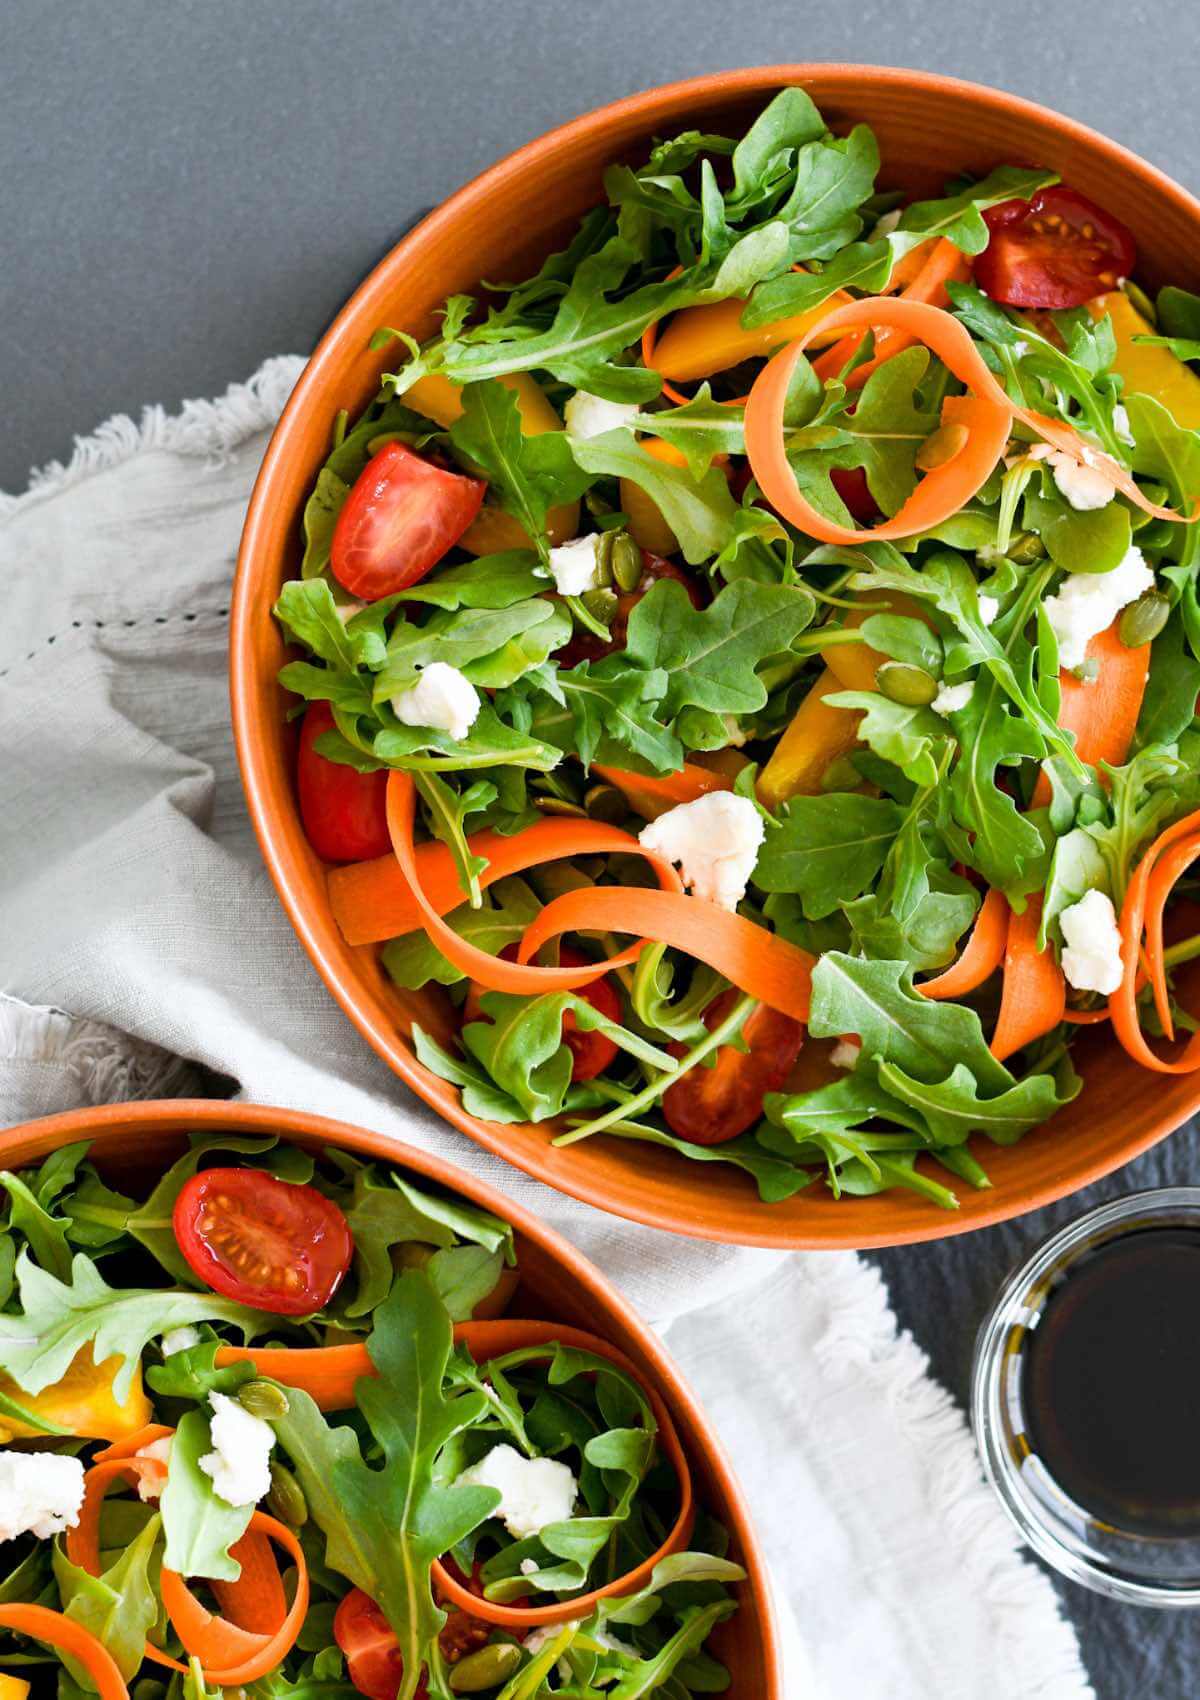 arugula salad in orange round bowls with cherry tomatoes, crumbled goat cheese, ribbon carrots, and bell peppers.